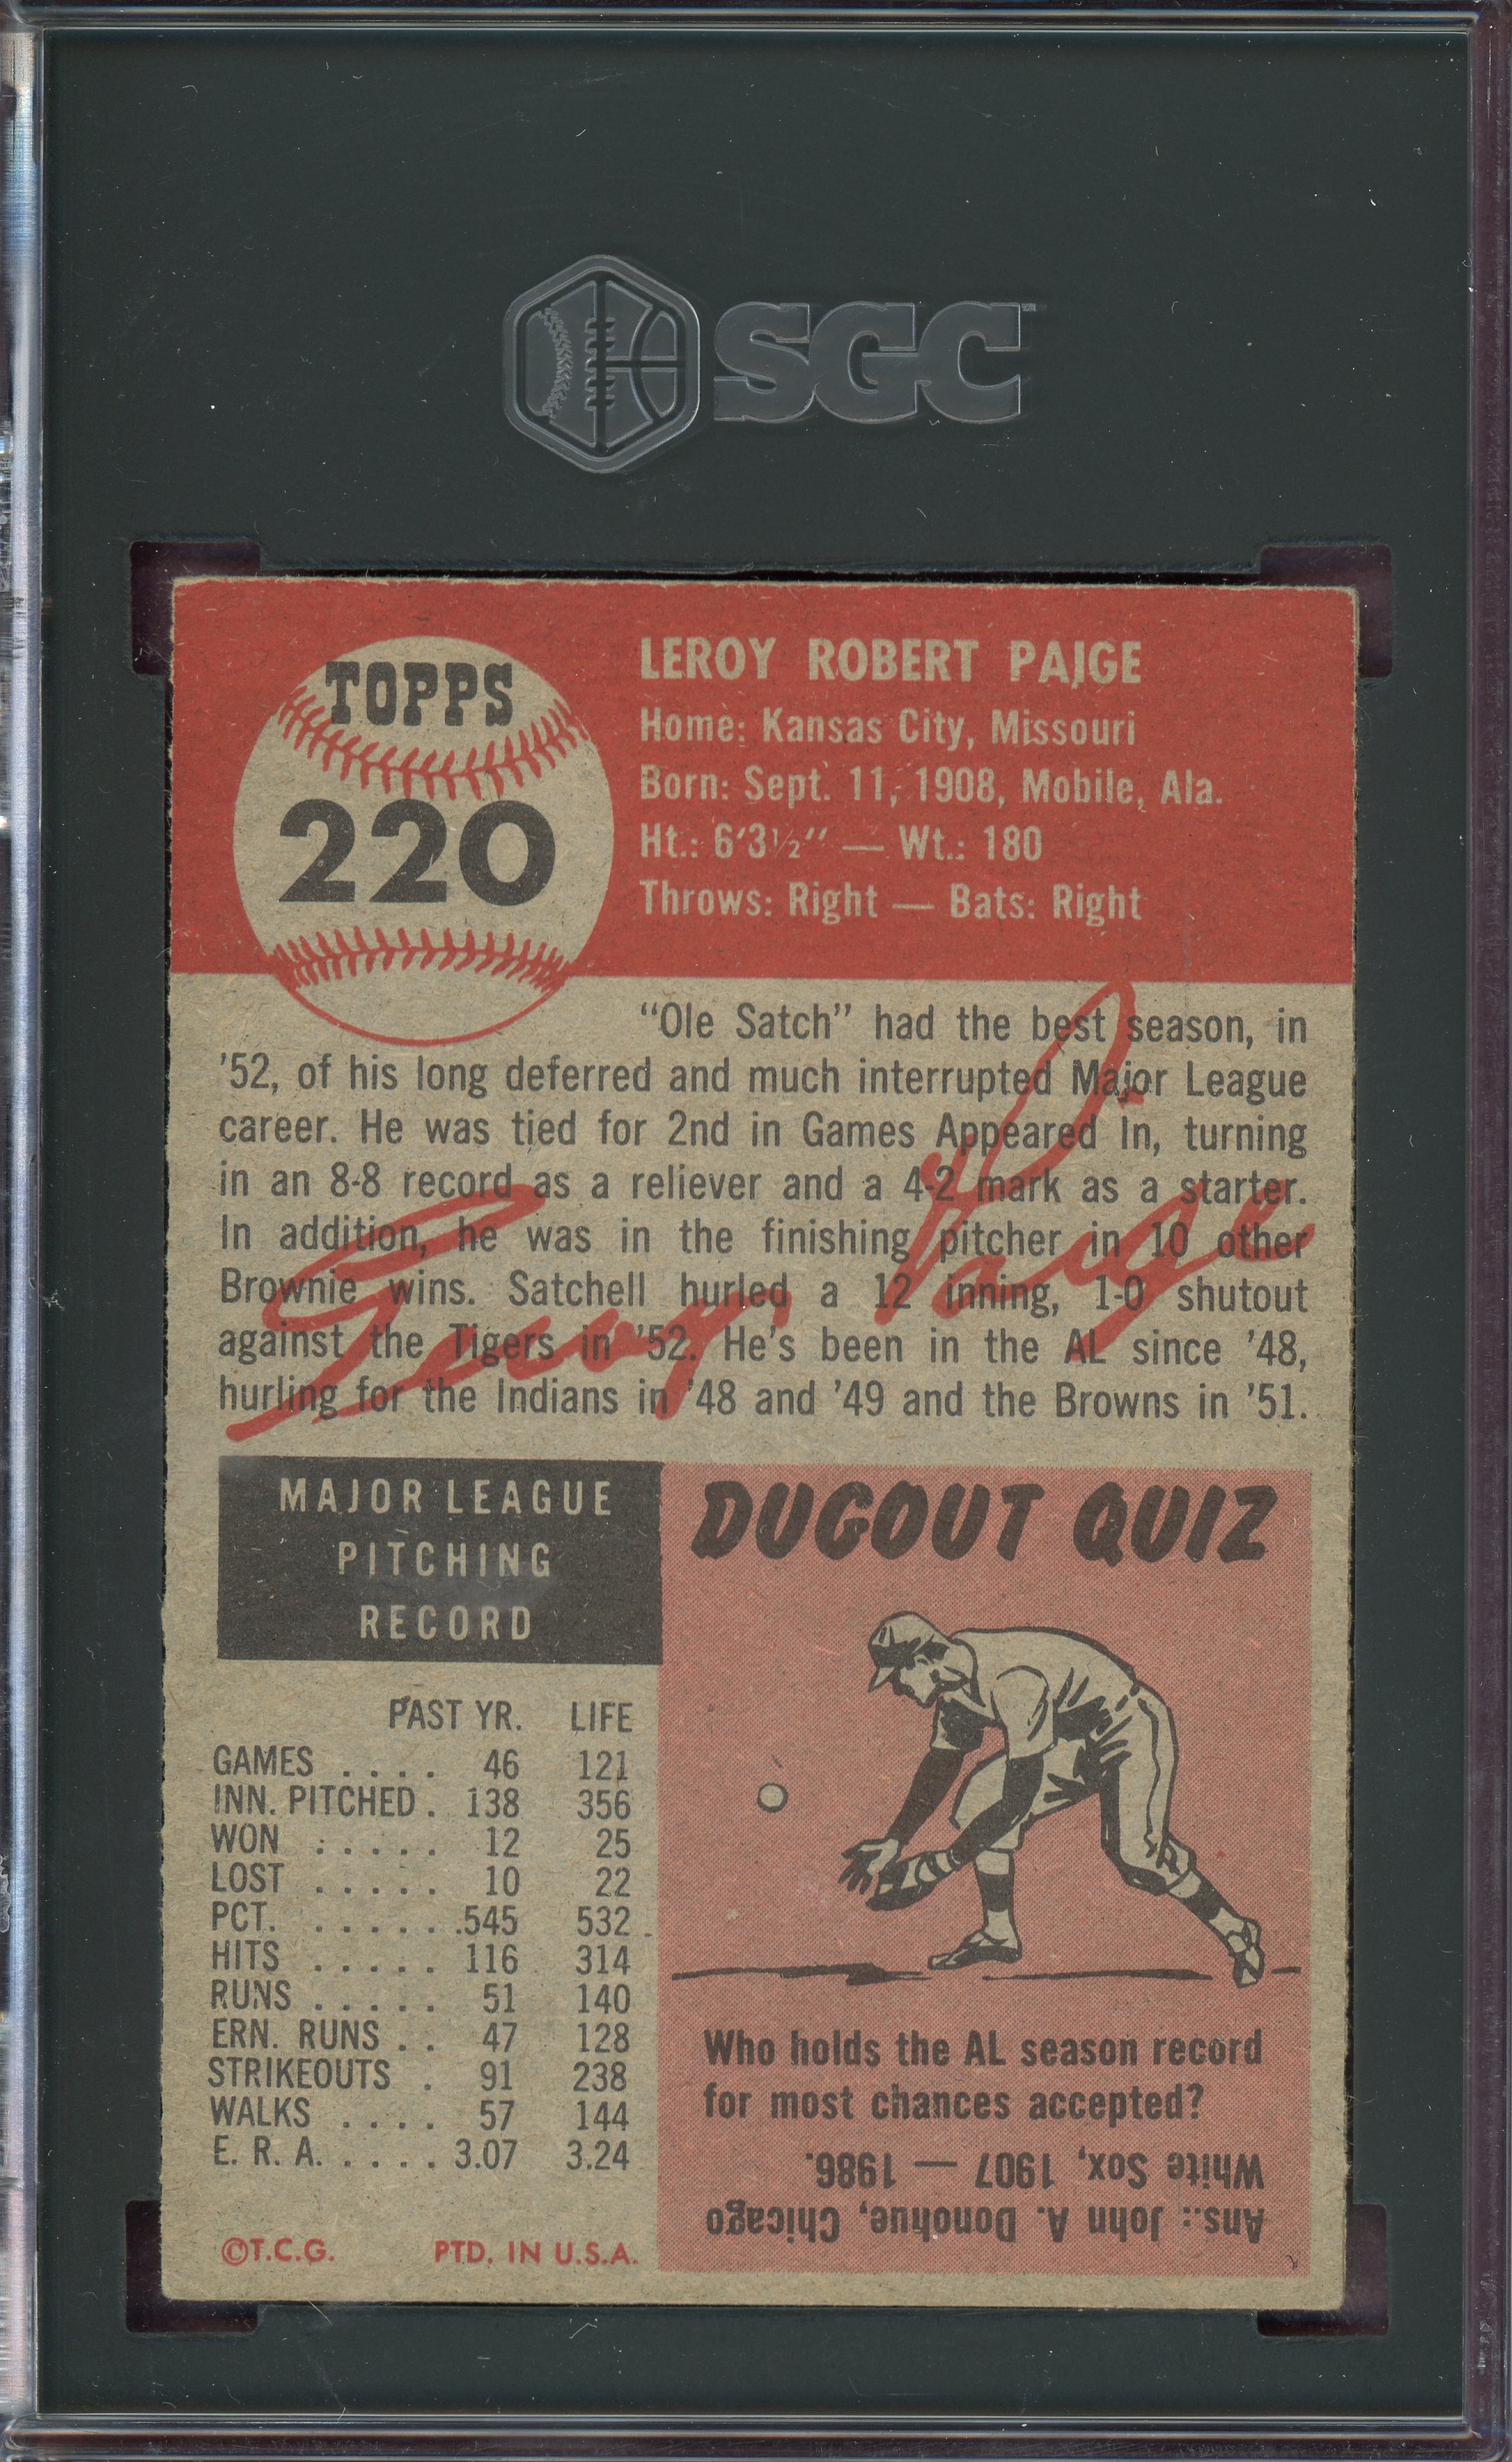 1953 Topps #220 Satchel Paige UER/Misspelled Satchell/on card 